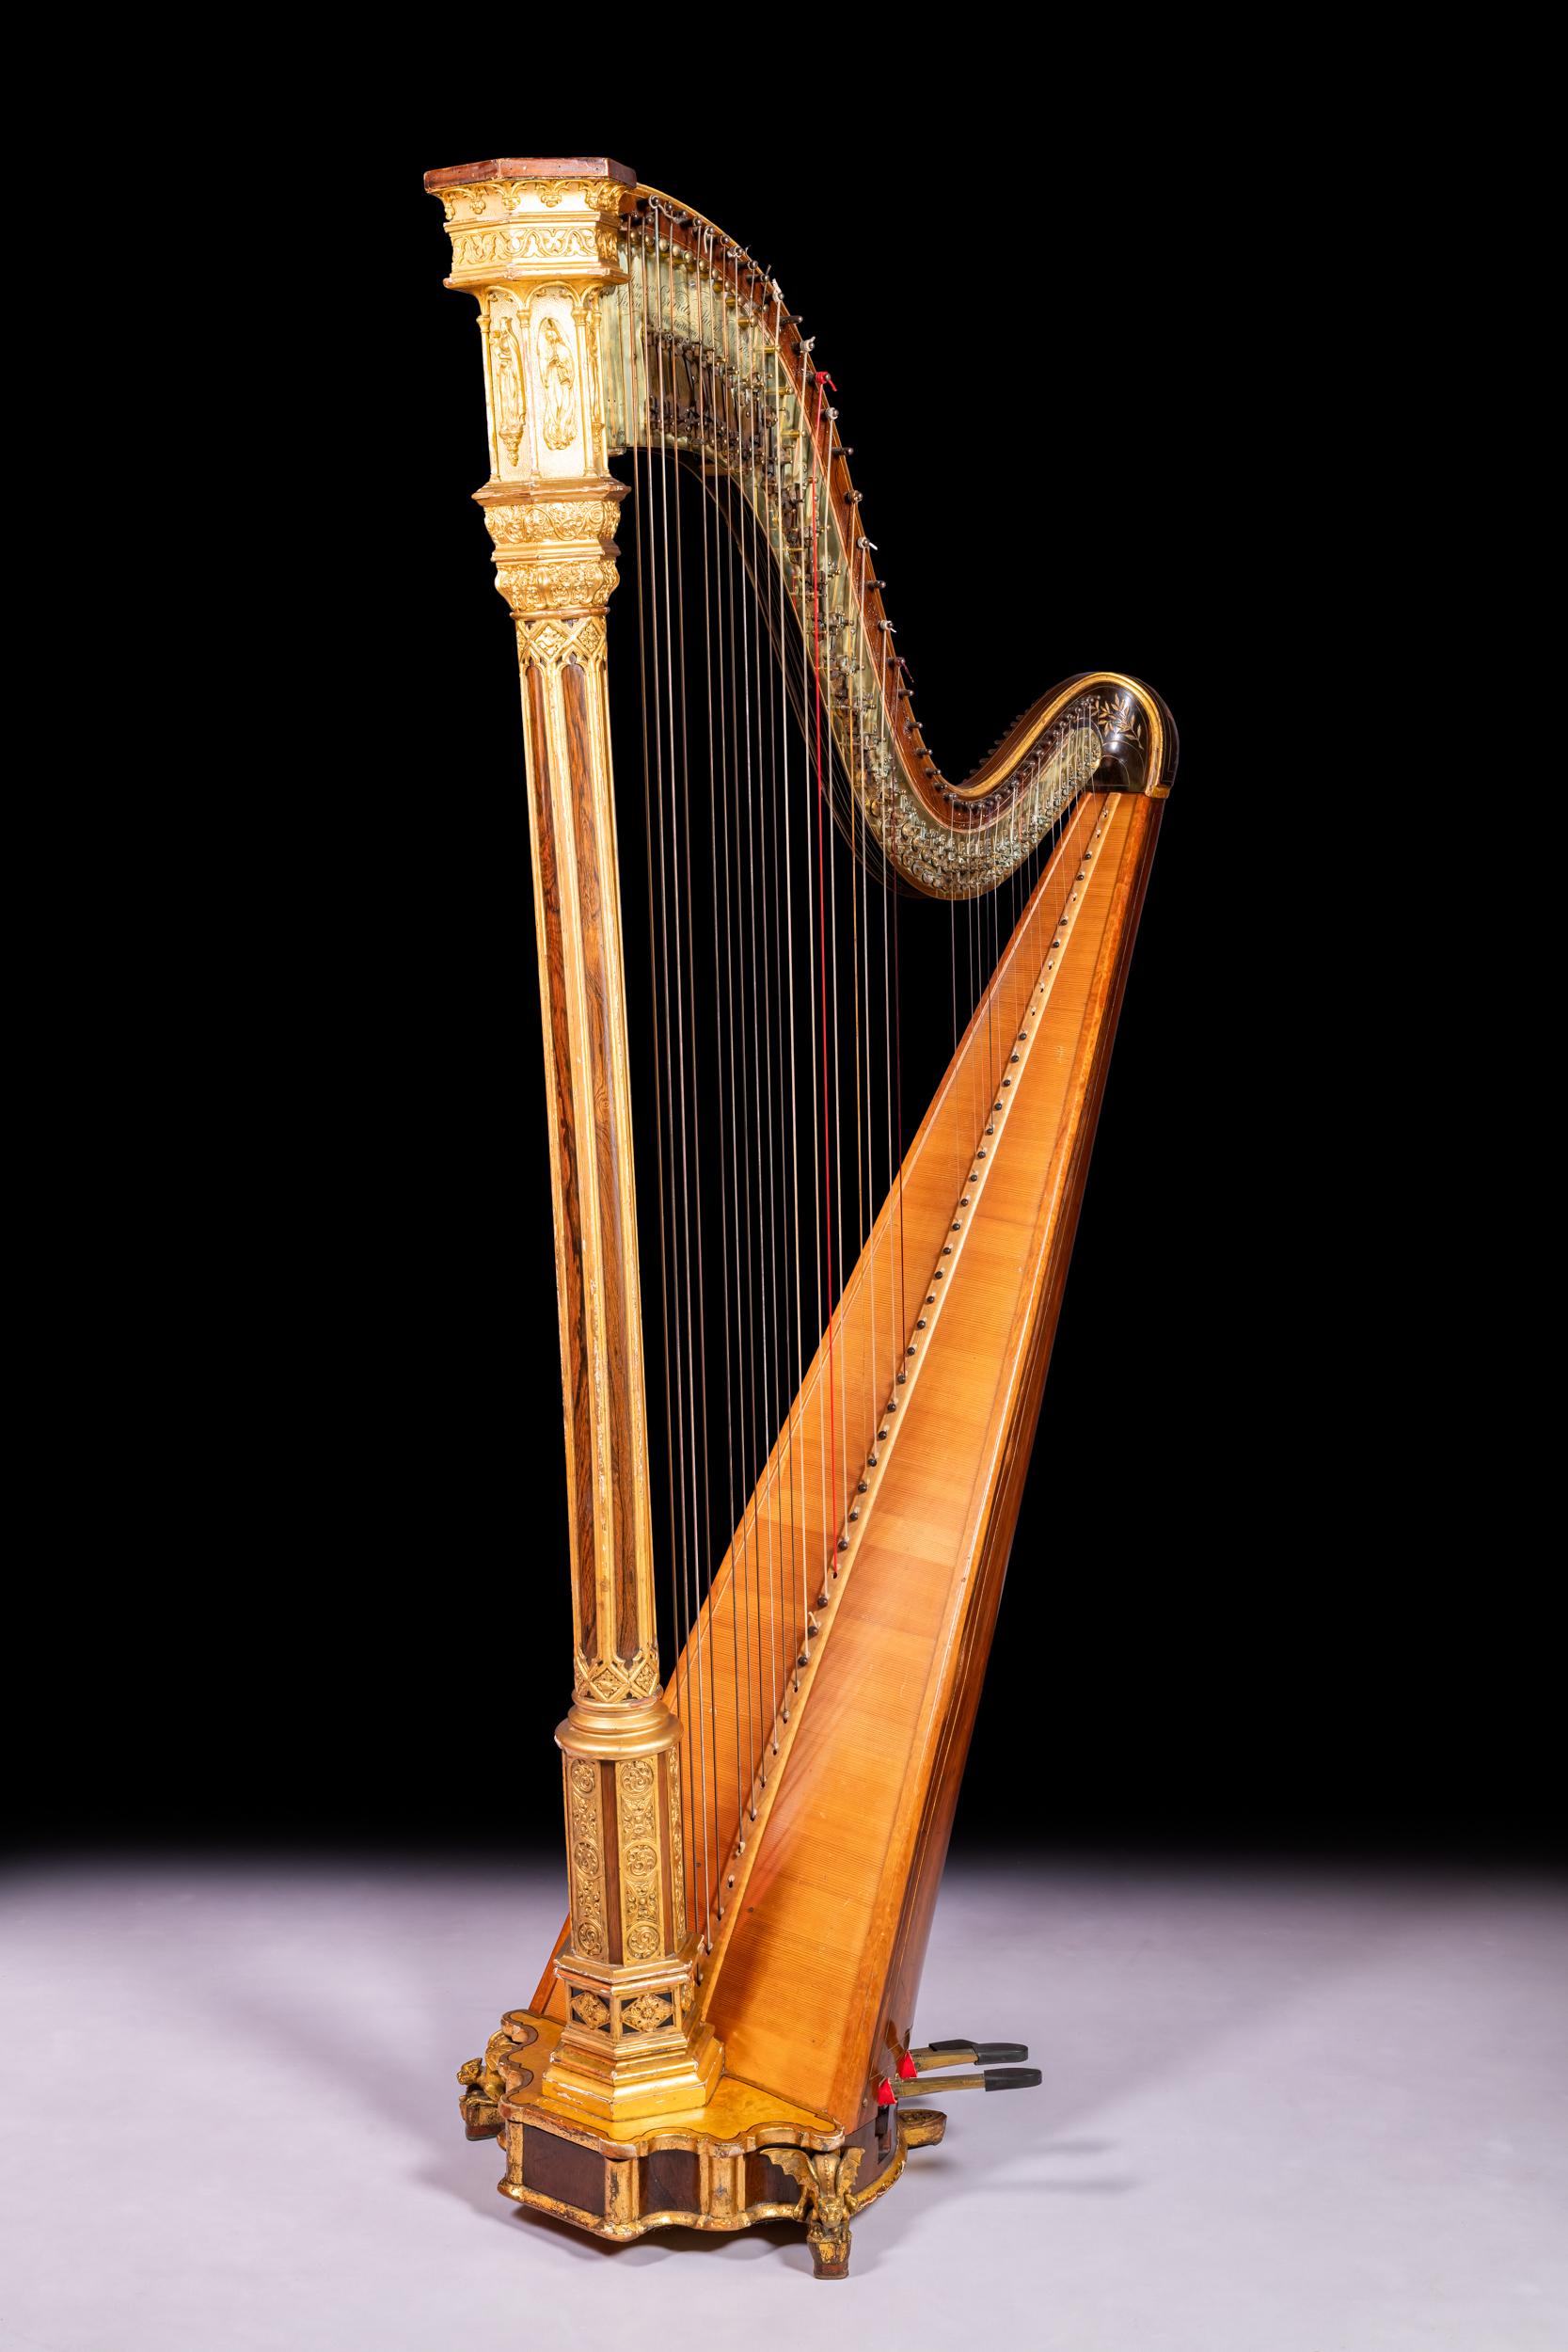 English Early 19th Century Parcel Gilt Gothic Revival Harp By Sebastian Erard For Sale